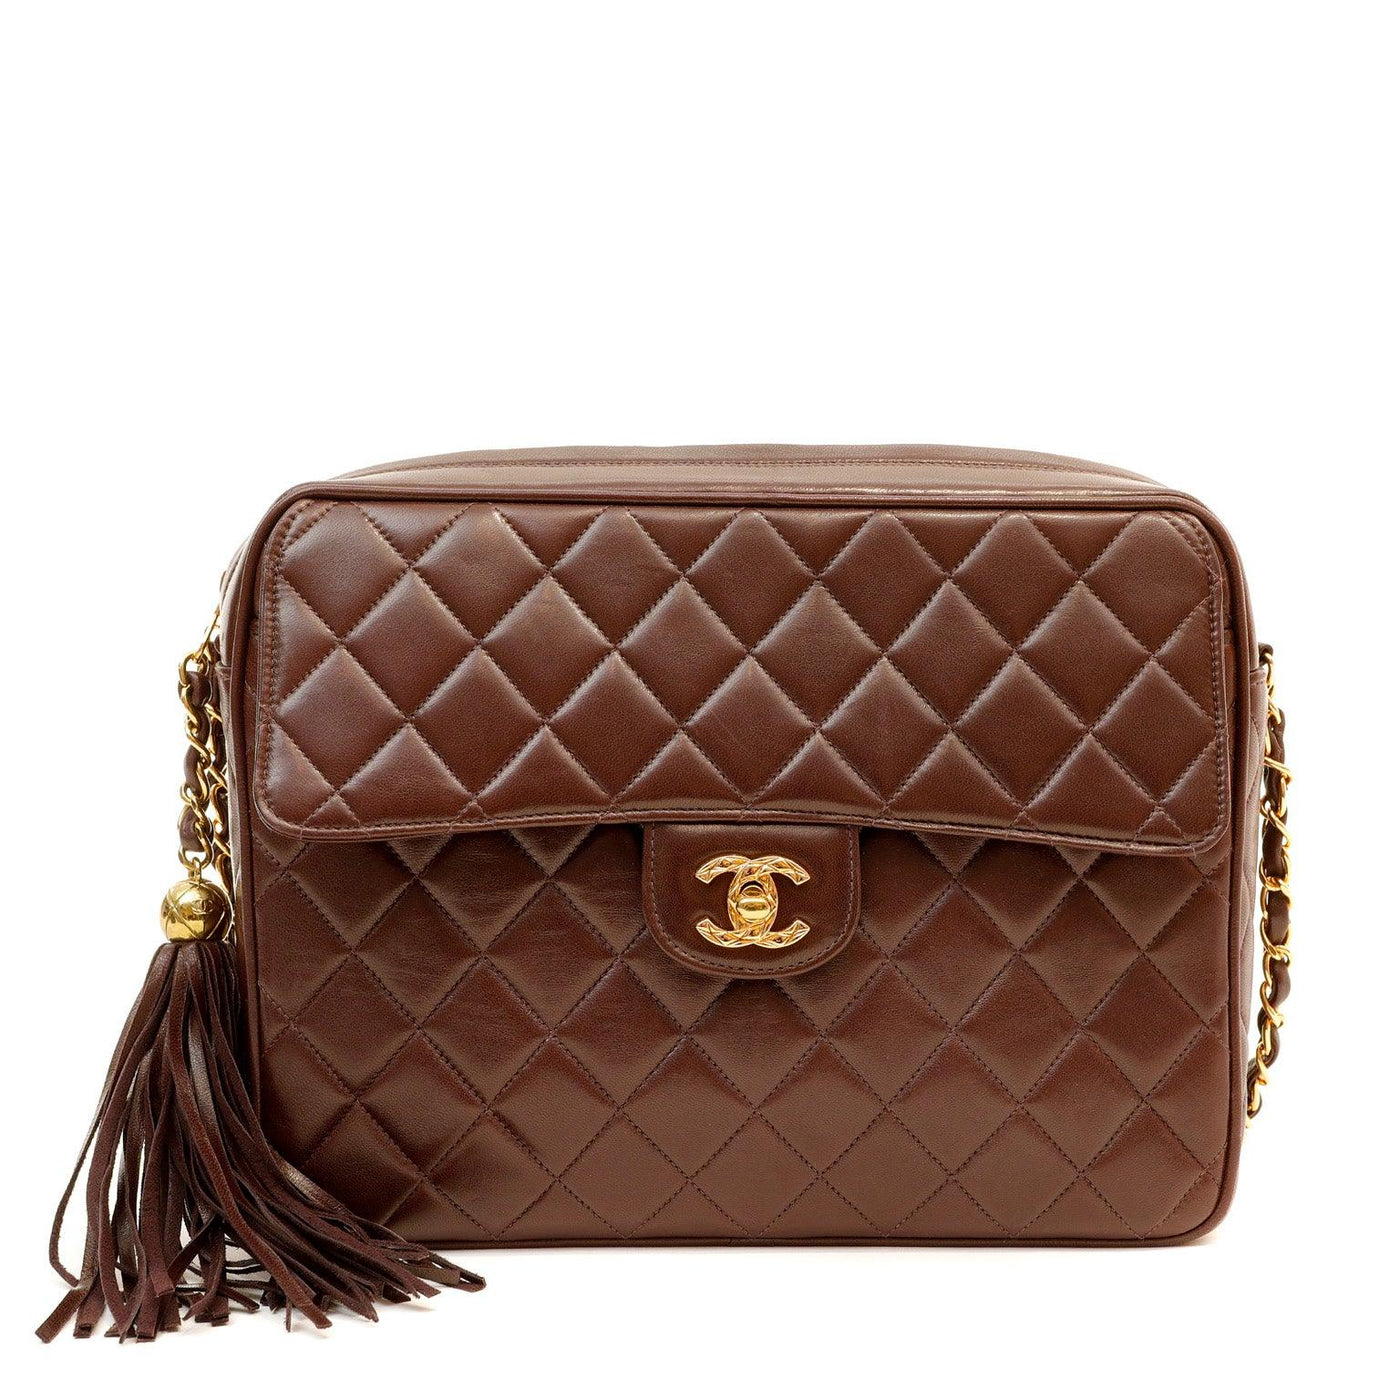 Chanel Brown Lambskin Vintage Camera Bag - Only Authentics